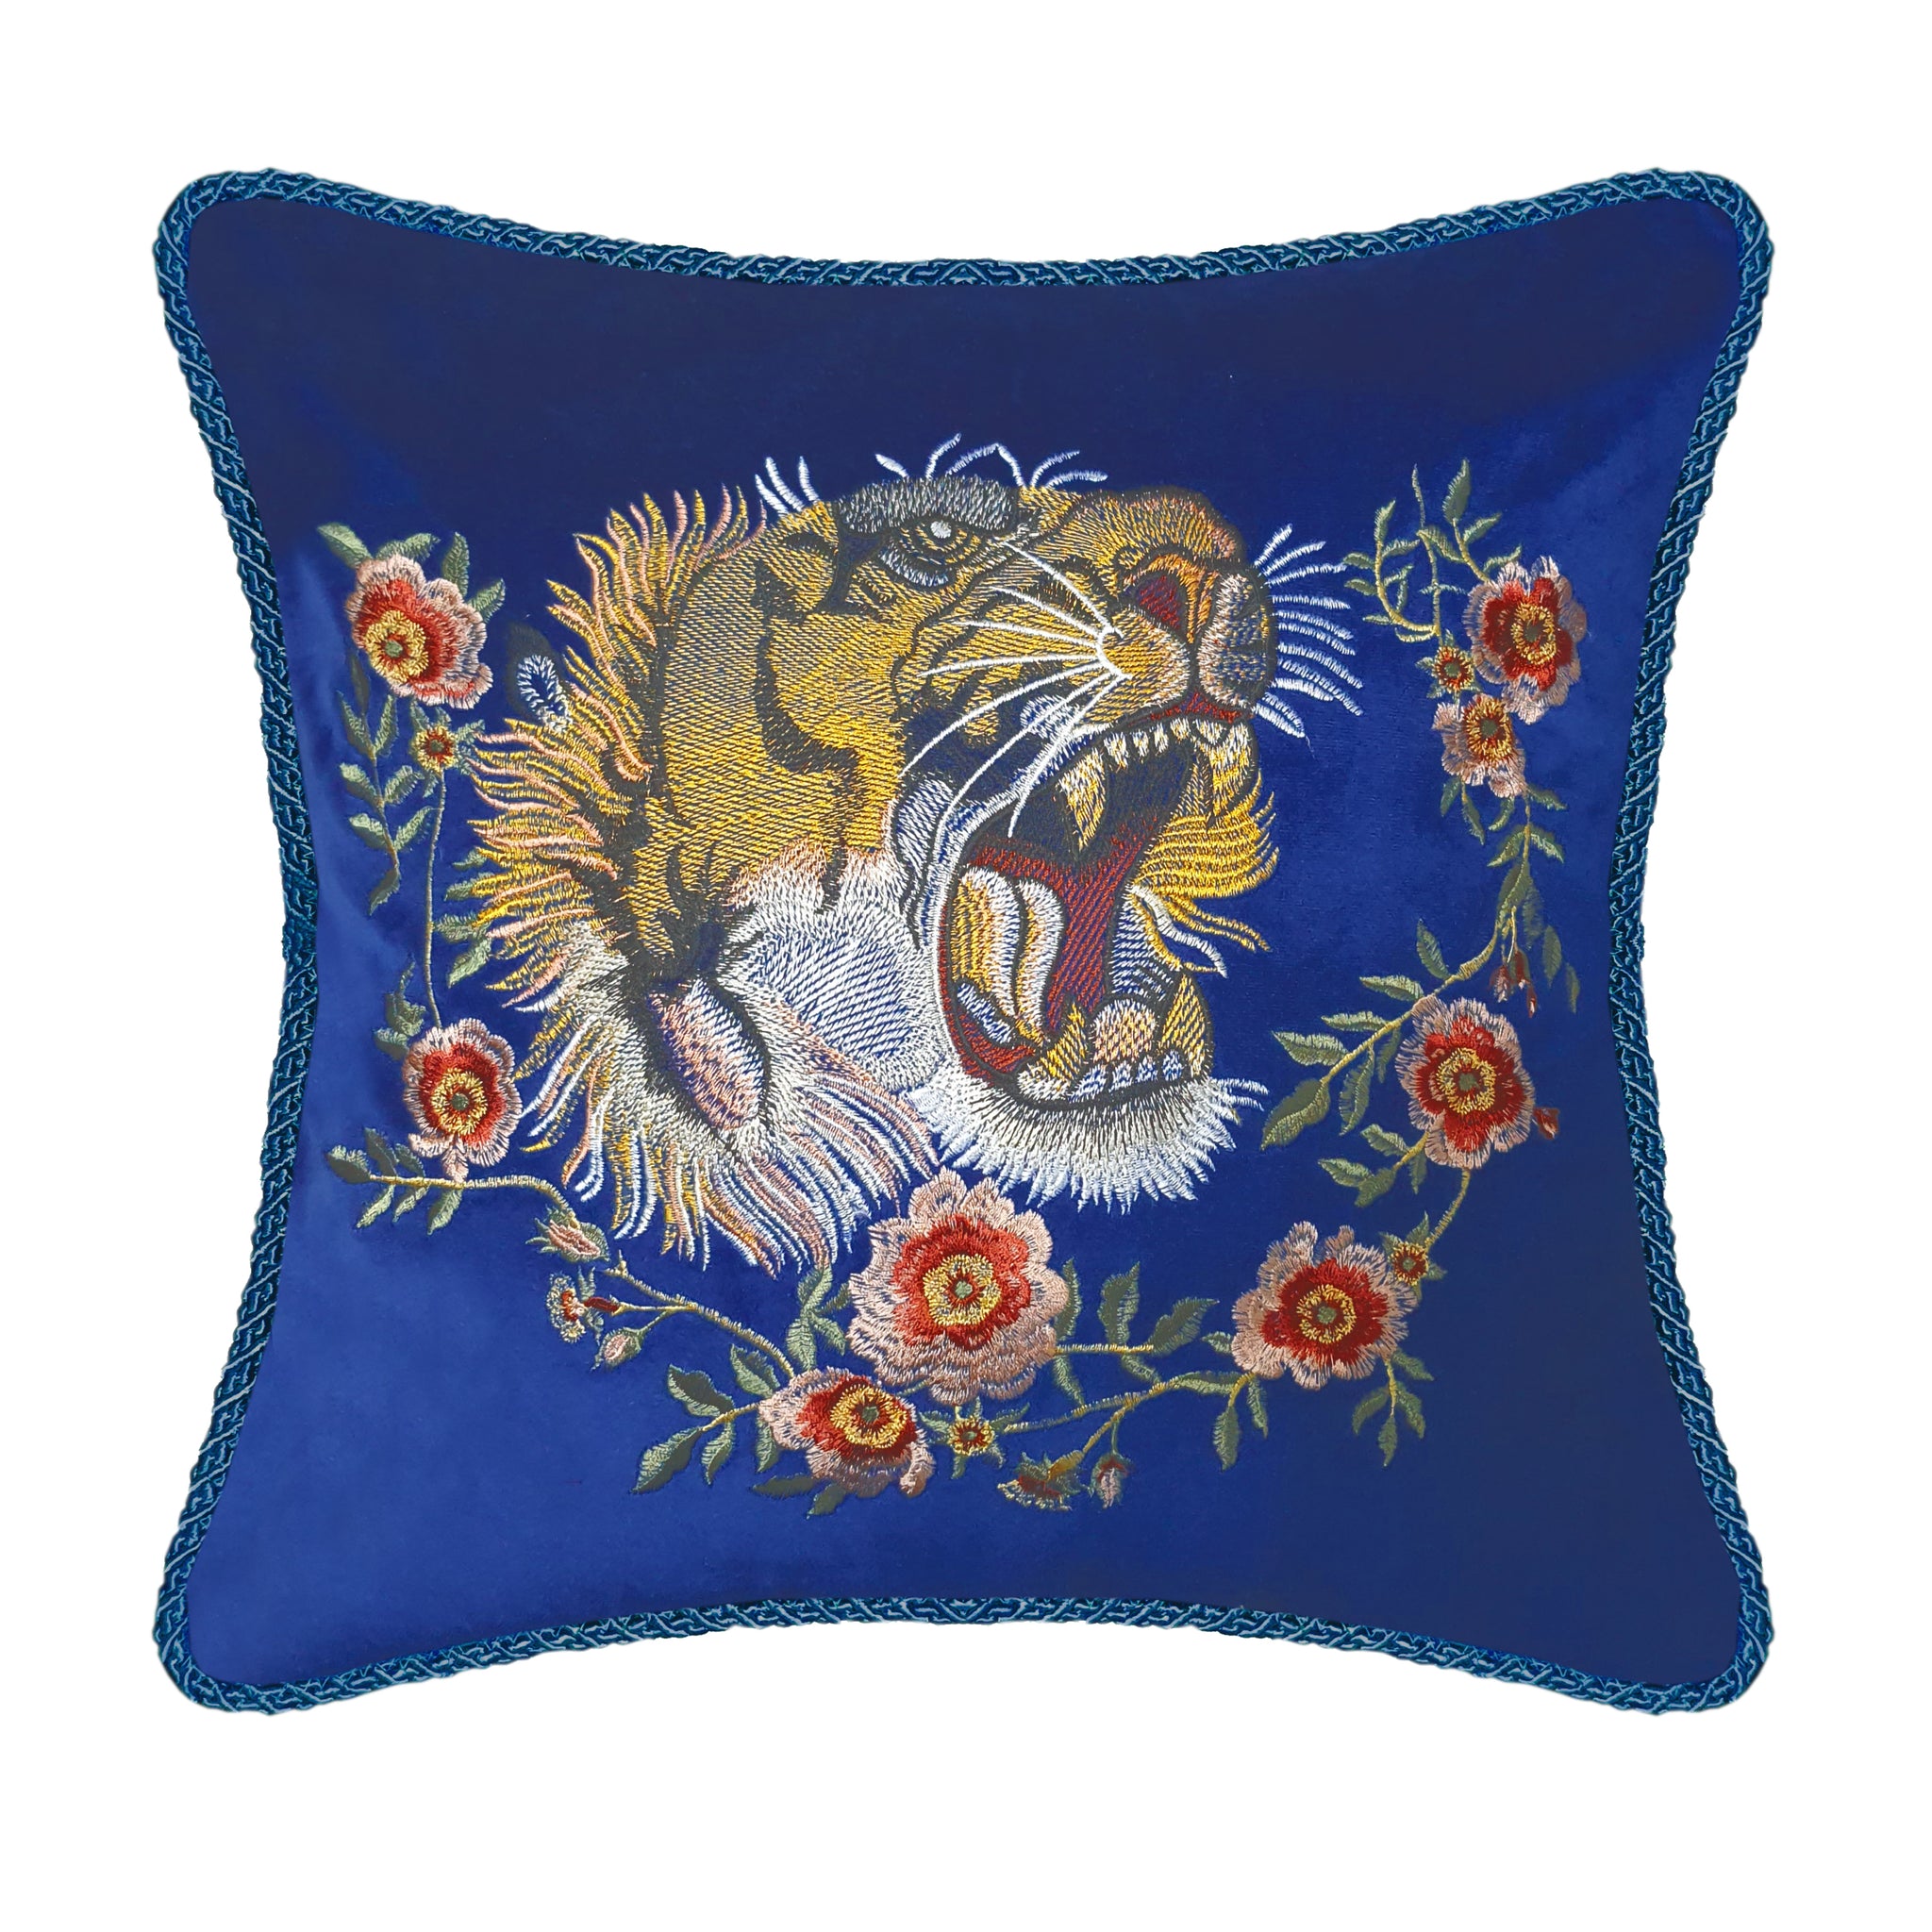 Velvet Cushion Cover Angry Tiger Embroidery Decorative Pillowcase Modern Home Decor Throw Pillow for Sofa Chair Living Room 45x45 cm